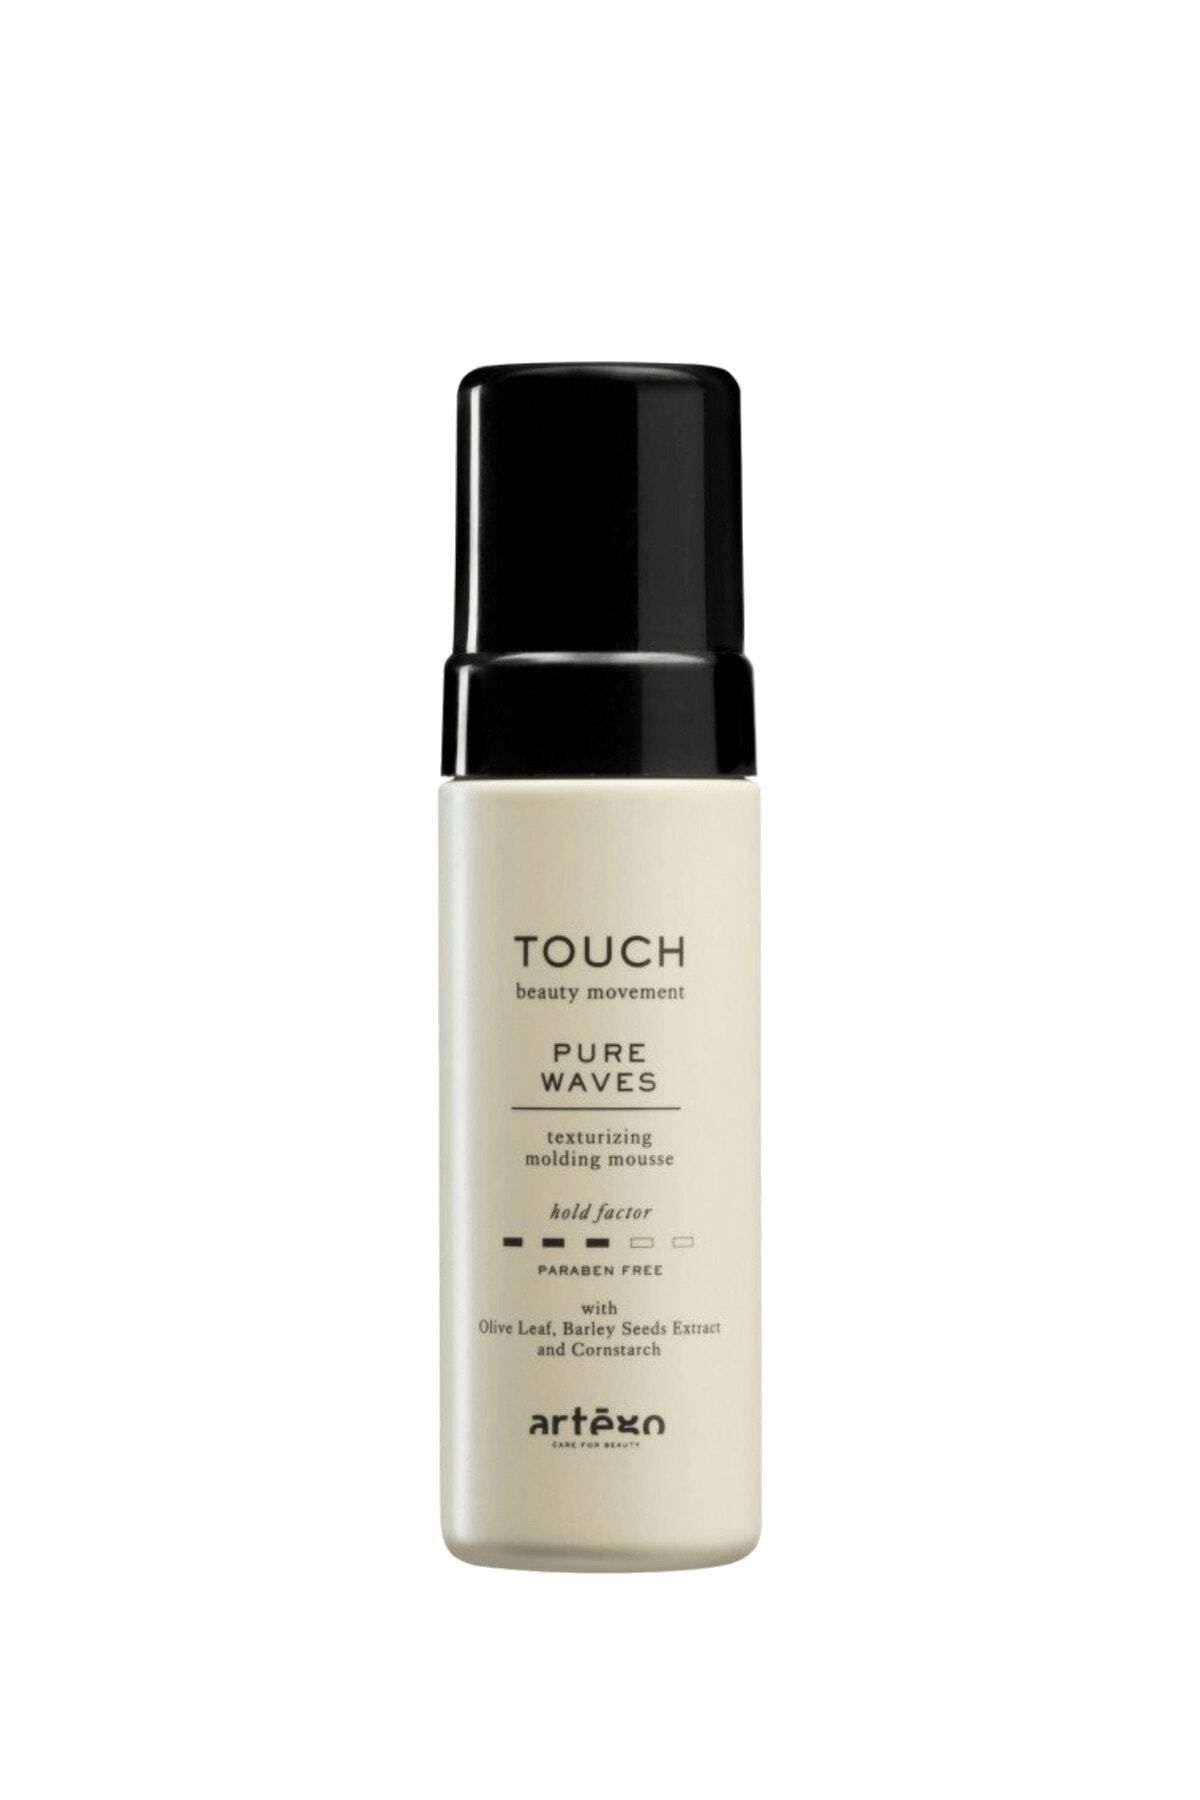 Artego Touch Pure Waves Texturizing Molding Mousse 150 ml 8032605273598